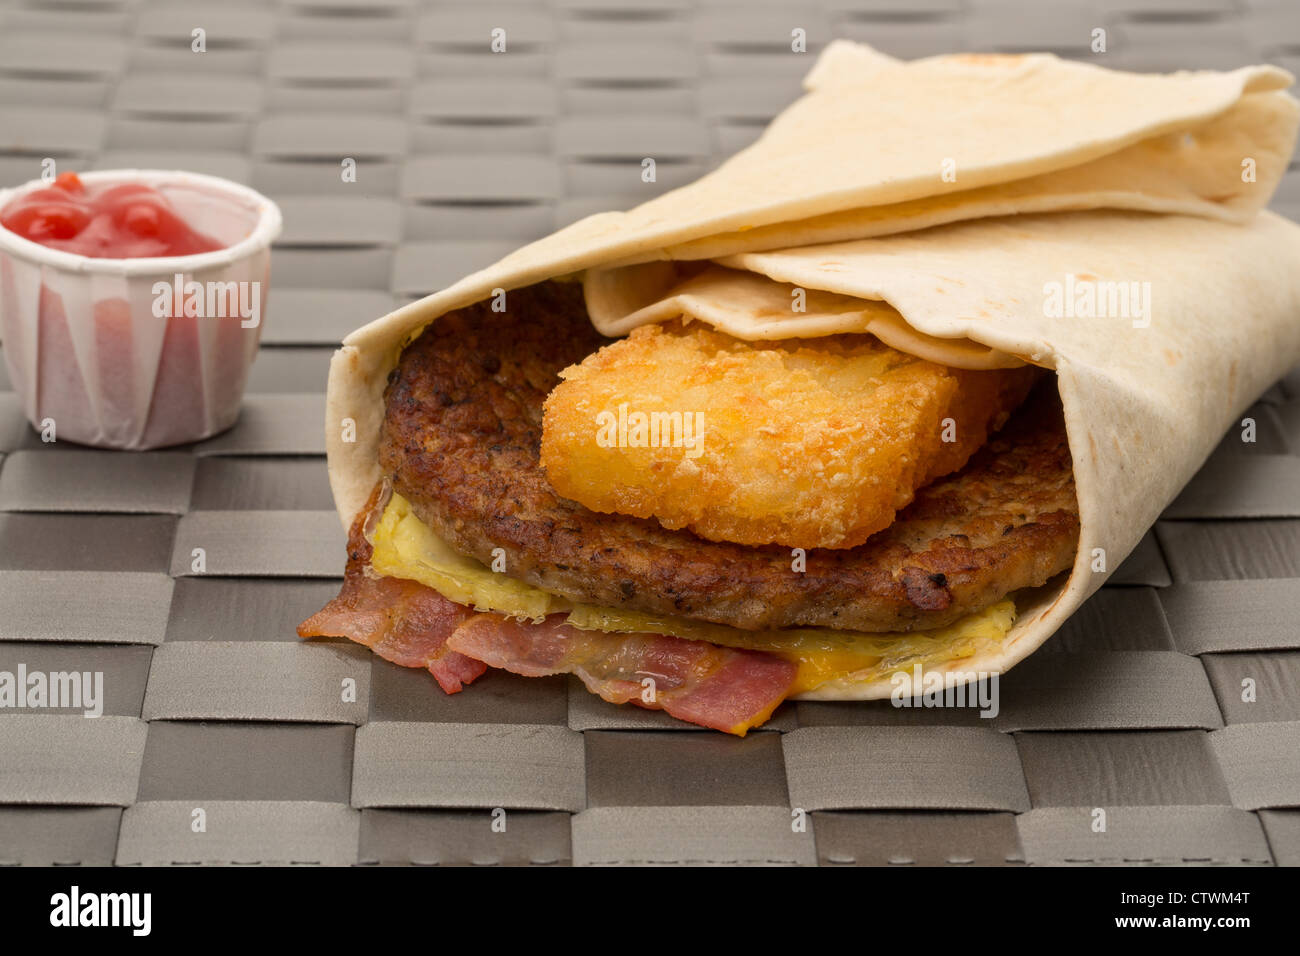 Burger wrap sandwich with bacon and a hash brown - shallow depth of field - studio shot Stock Photo